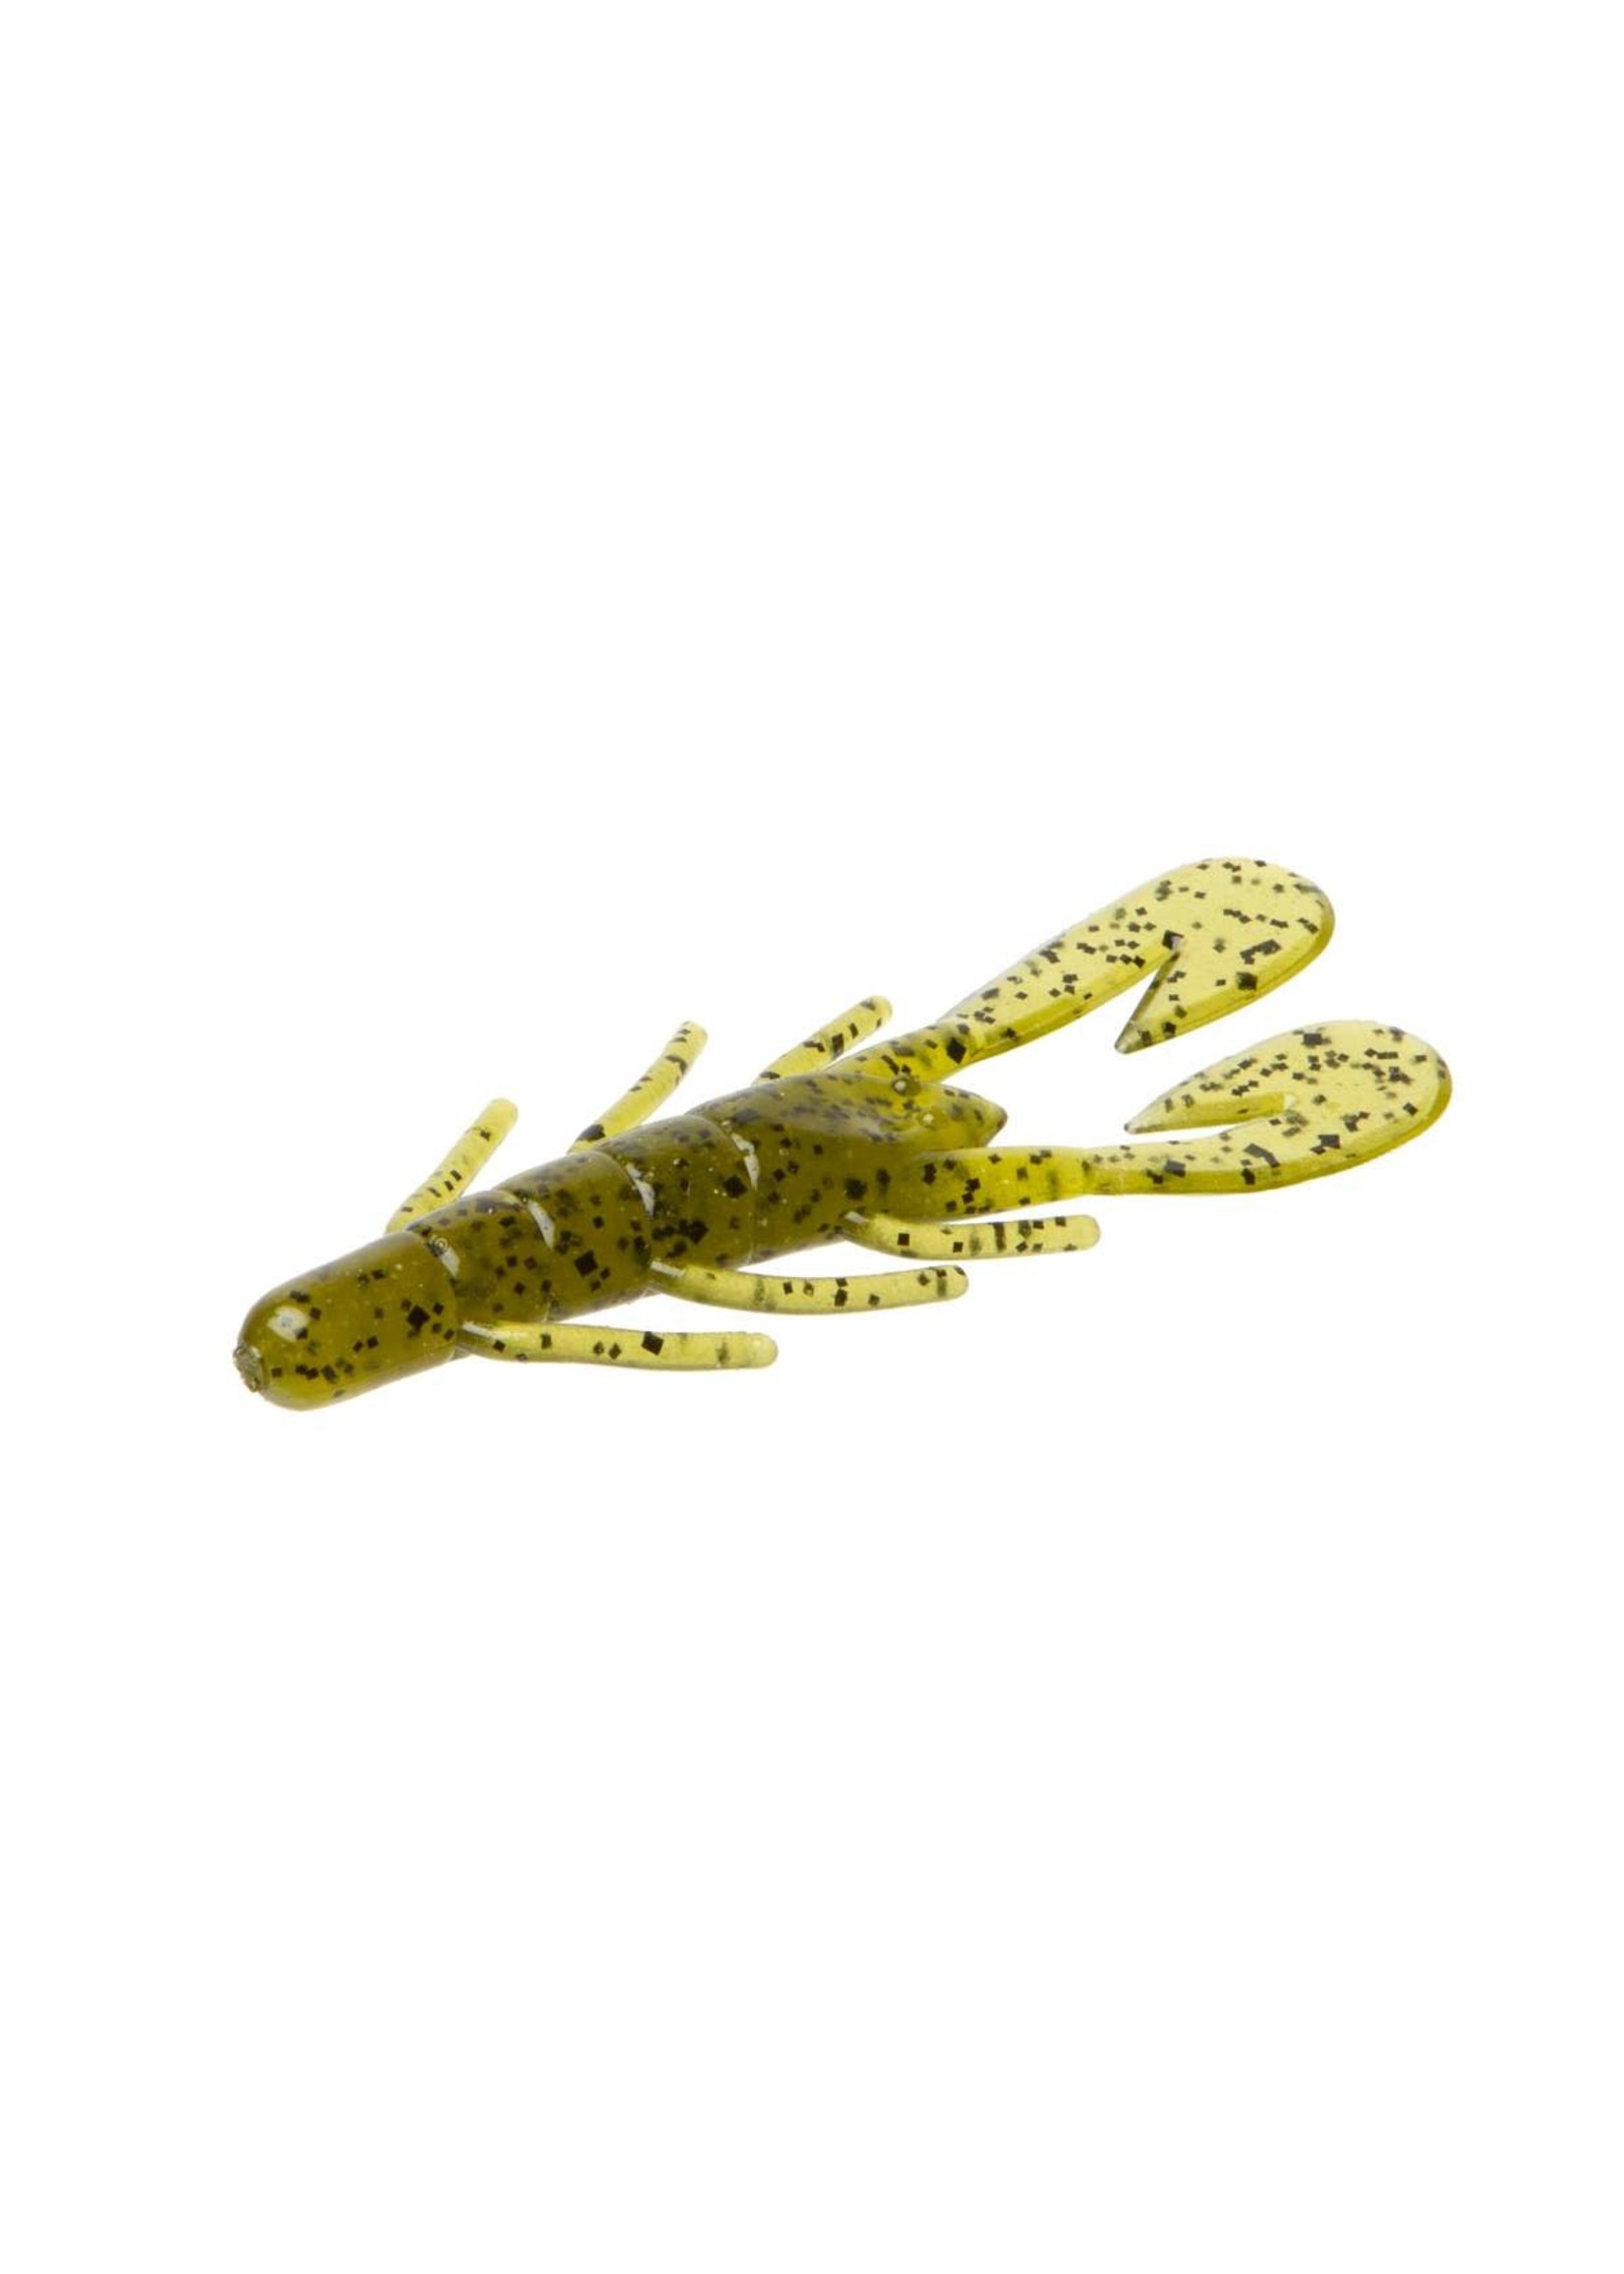 Zoom Mag Ultra Vibe Speed Craw